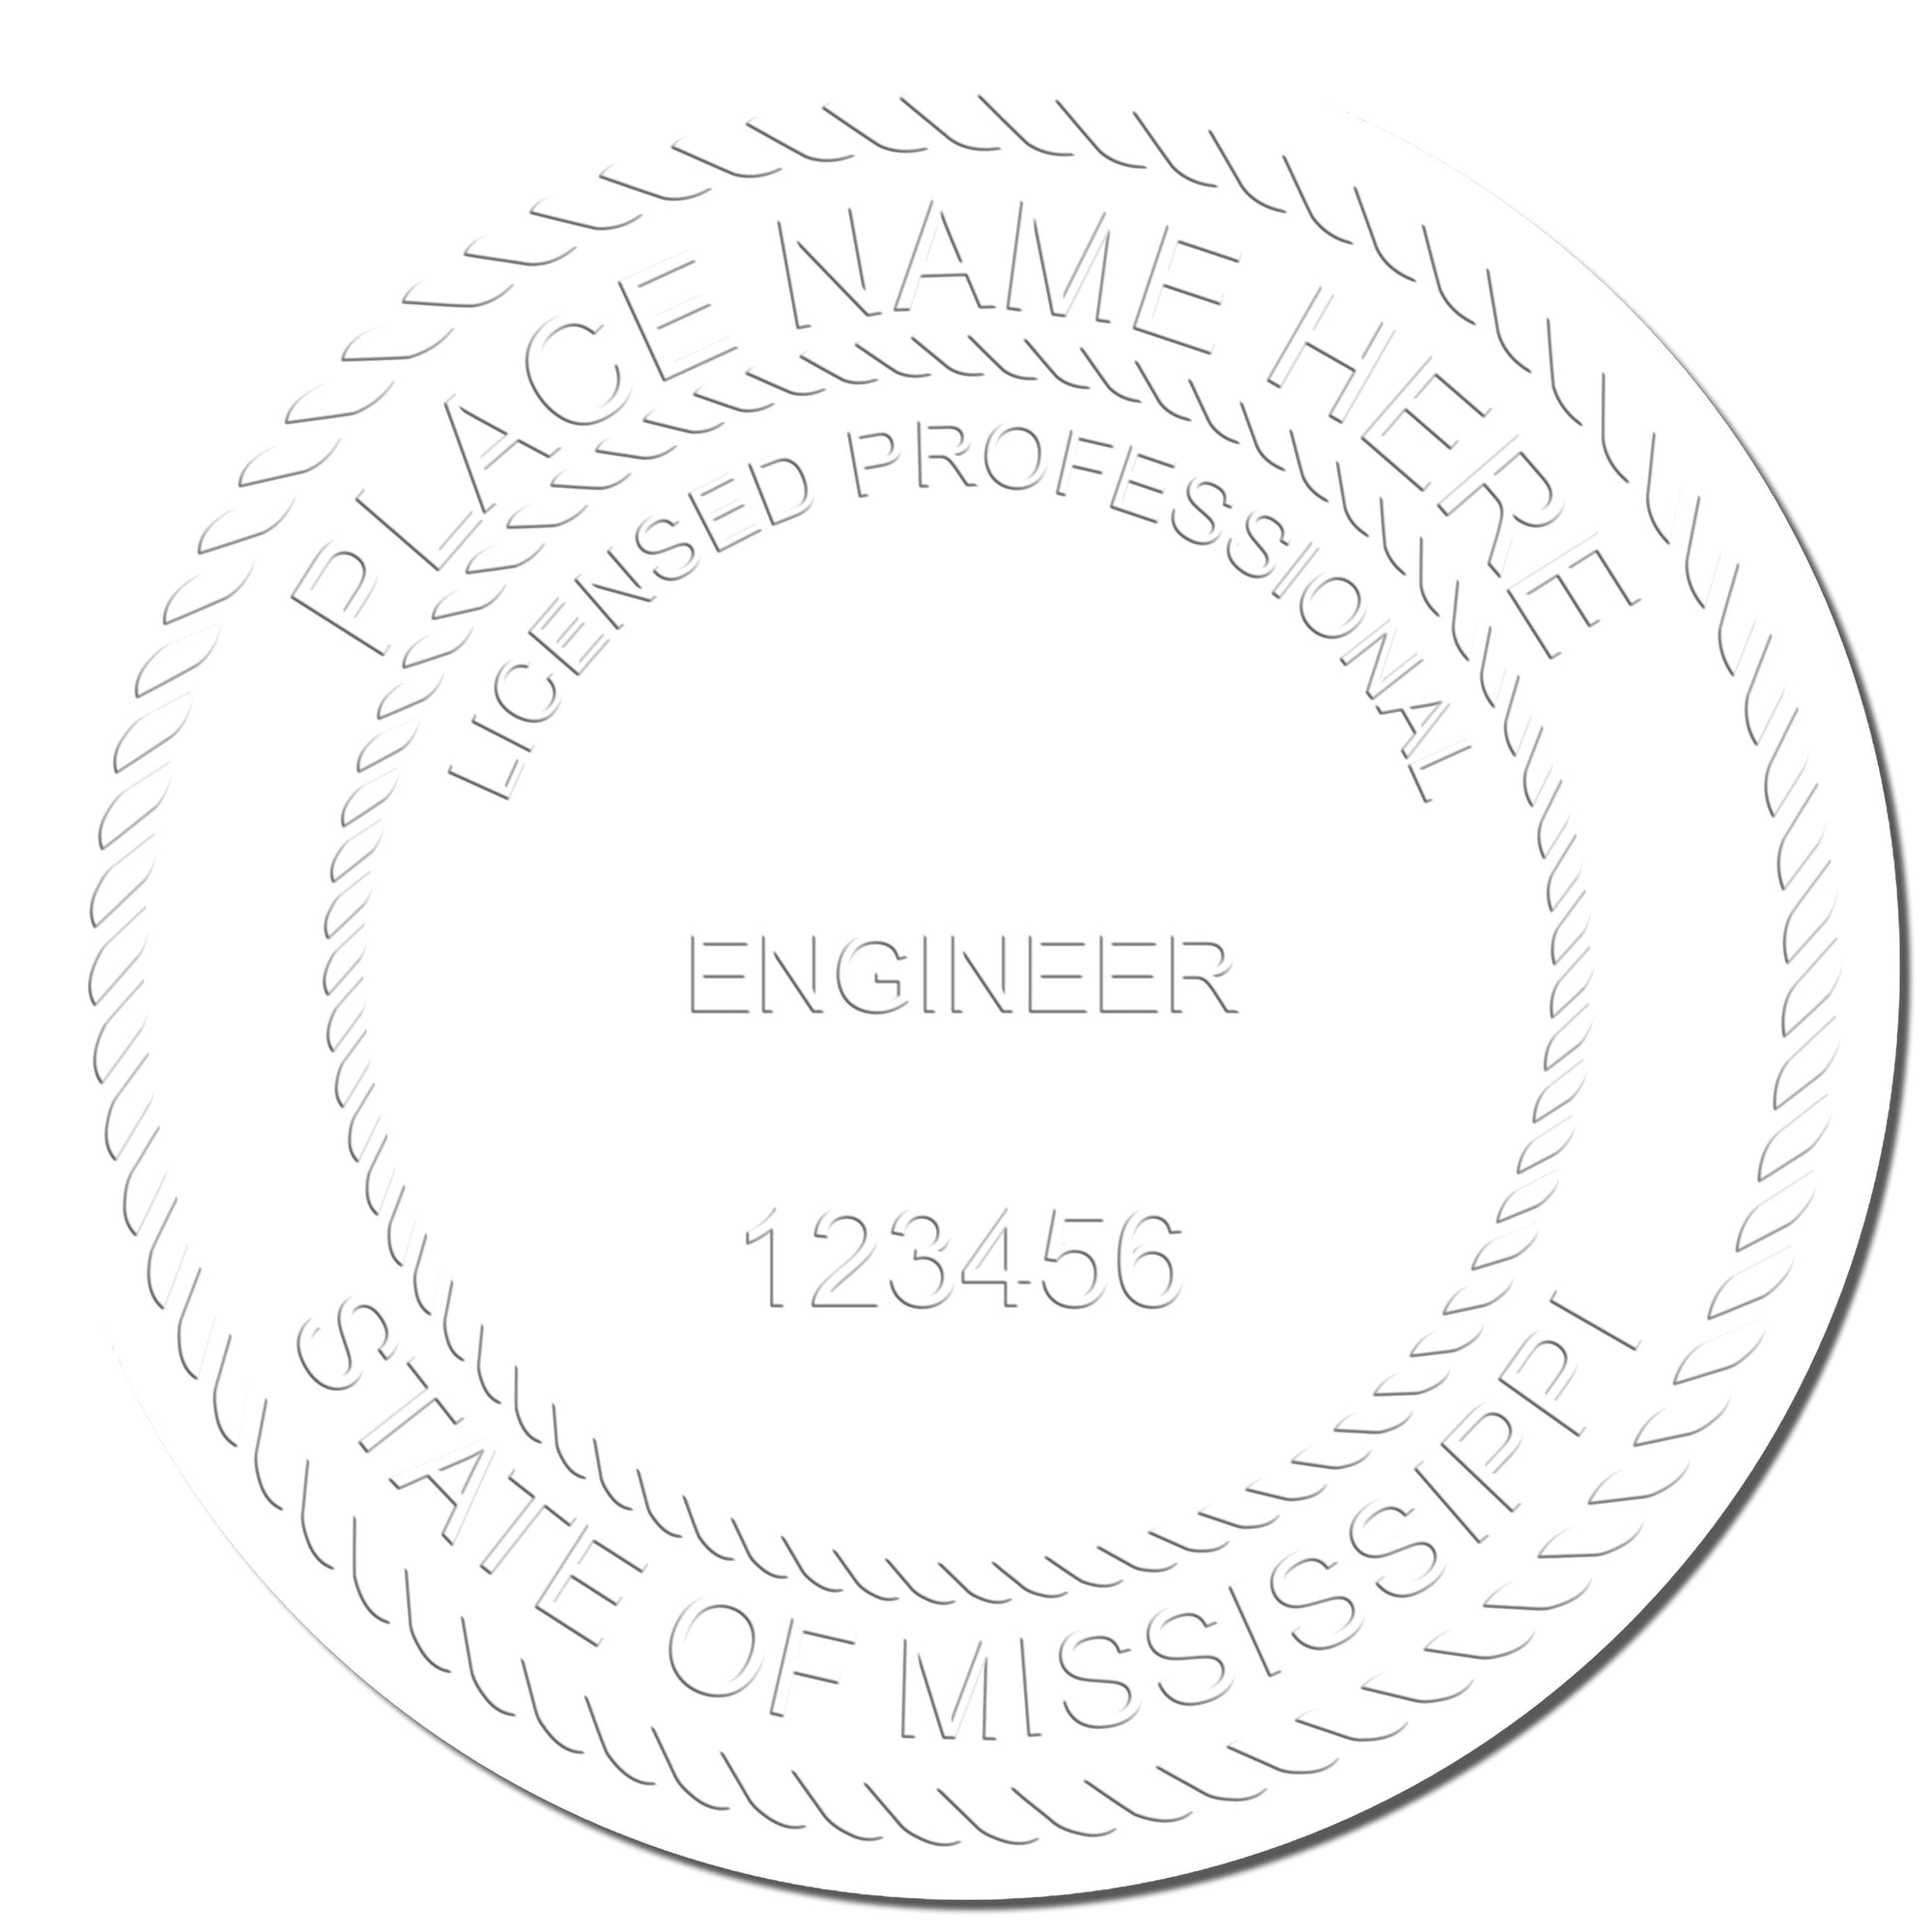 The main image for the Mississippi Engineer Desk Seal depicting a sample of the imprint and electronic files